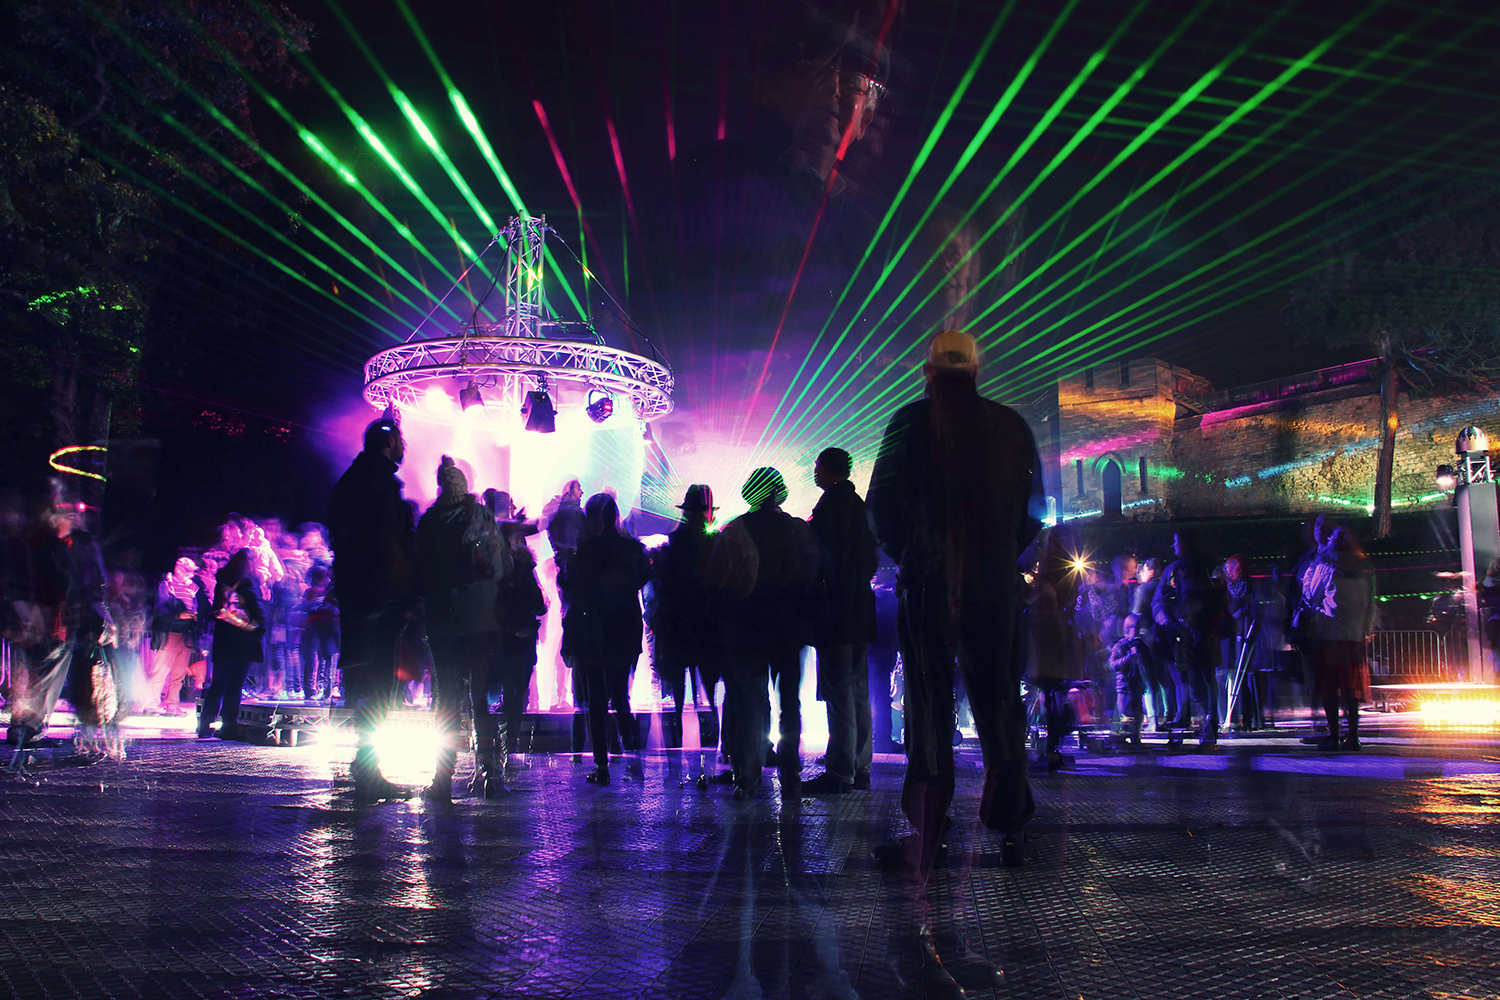 An outdoor art event for Frequency Festival sees people silhouetted against a backdrop of colourful lights and lasers